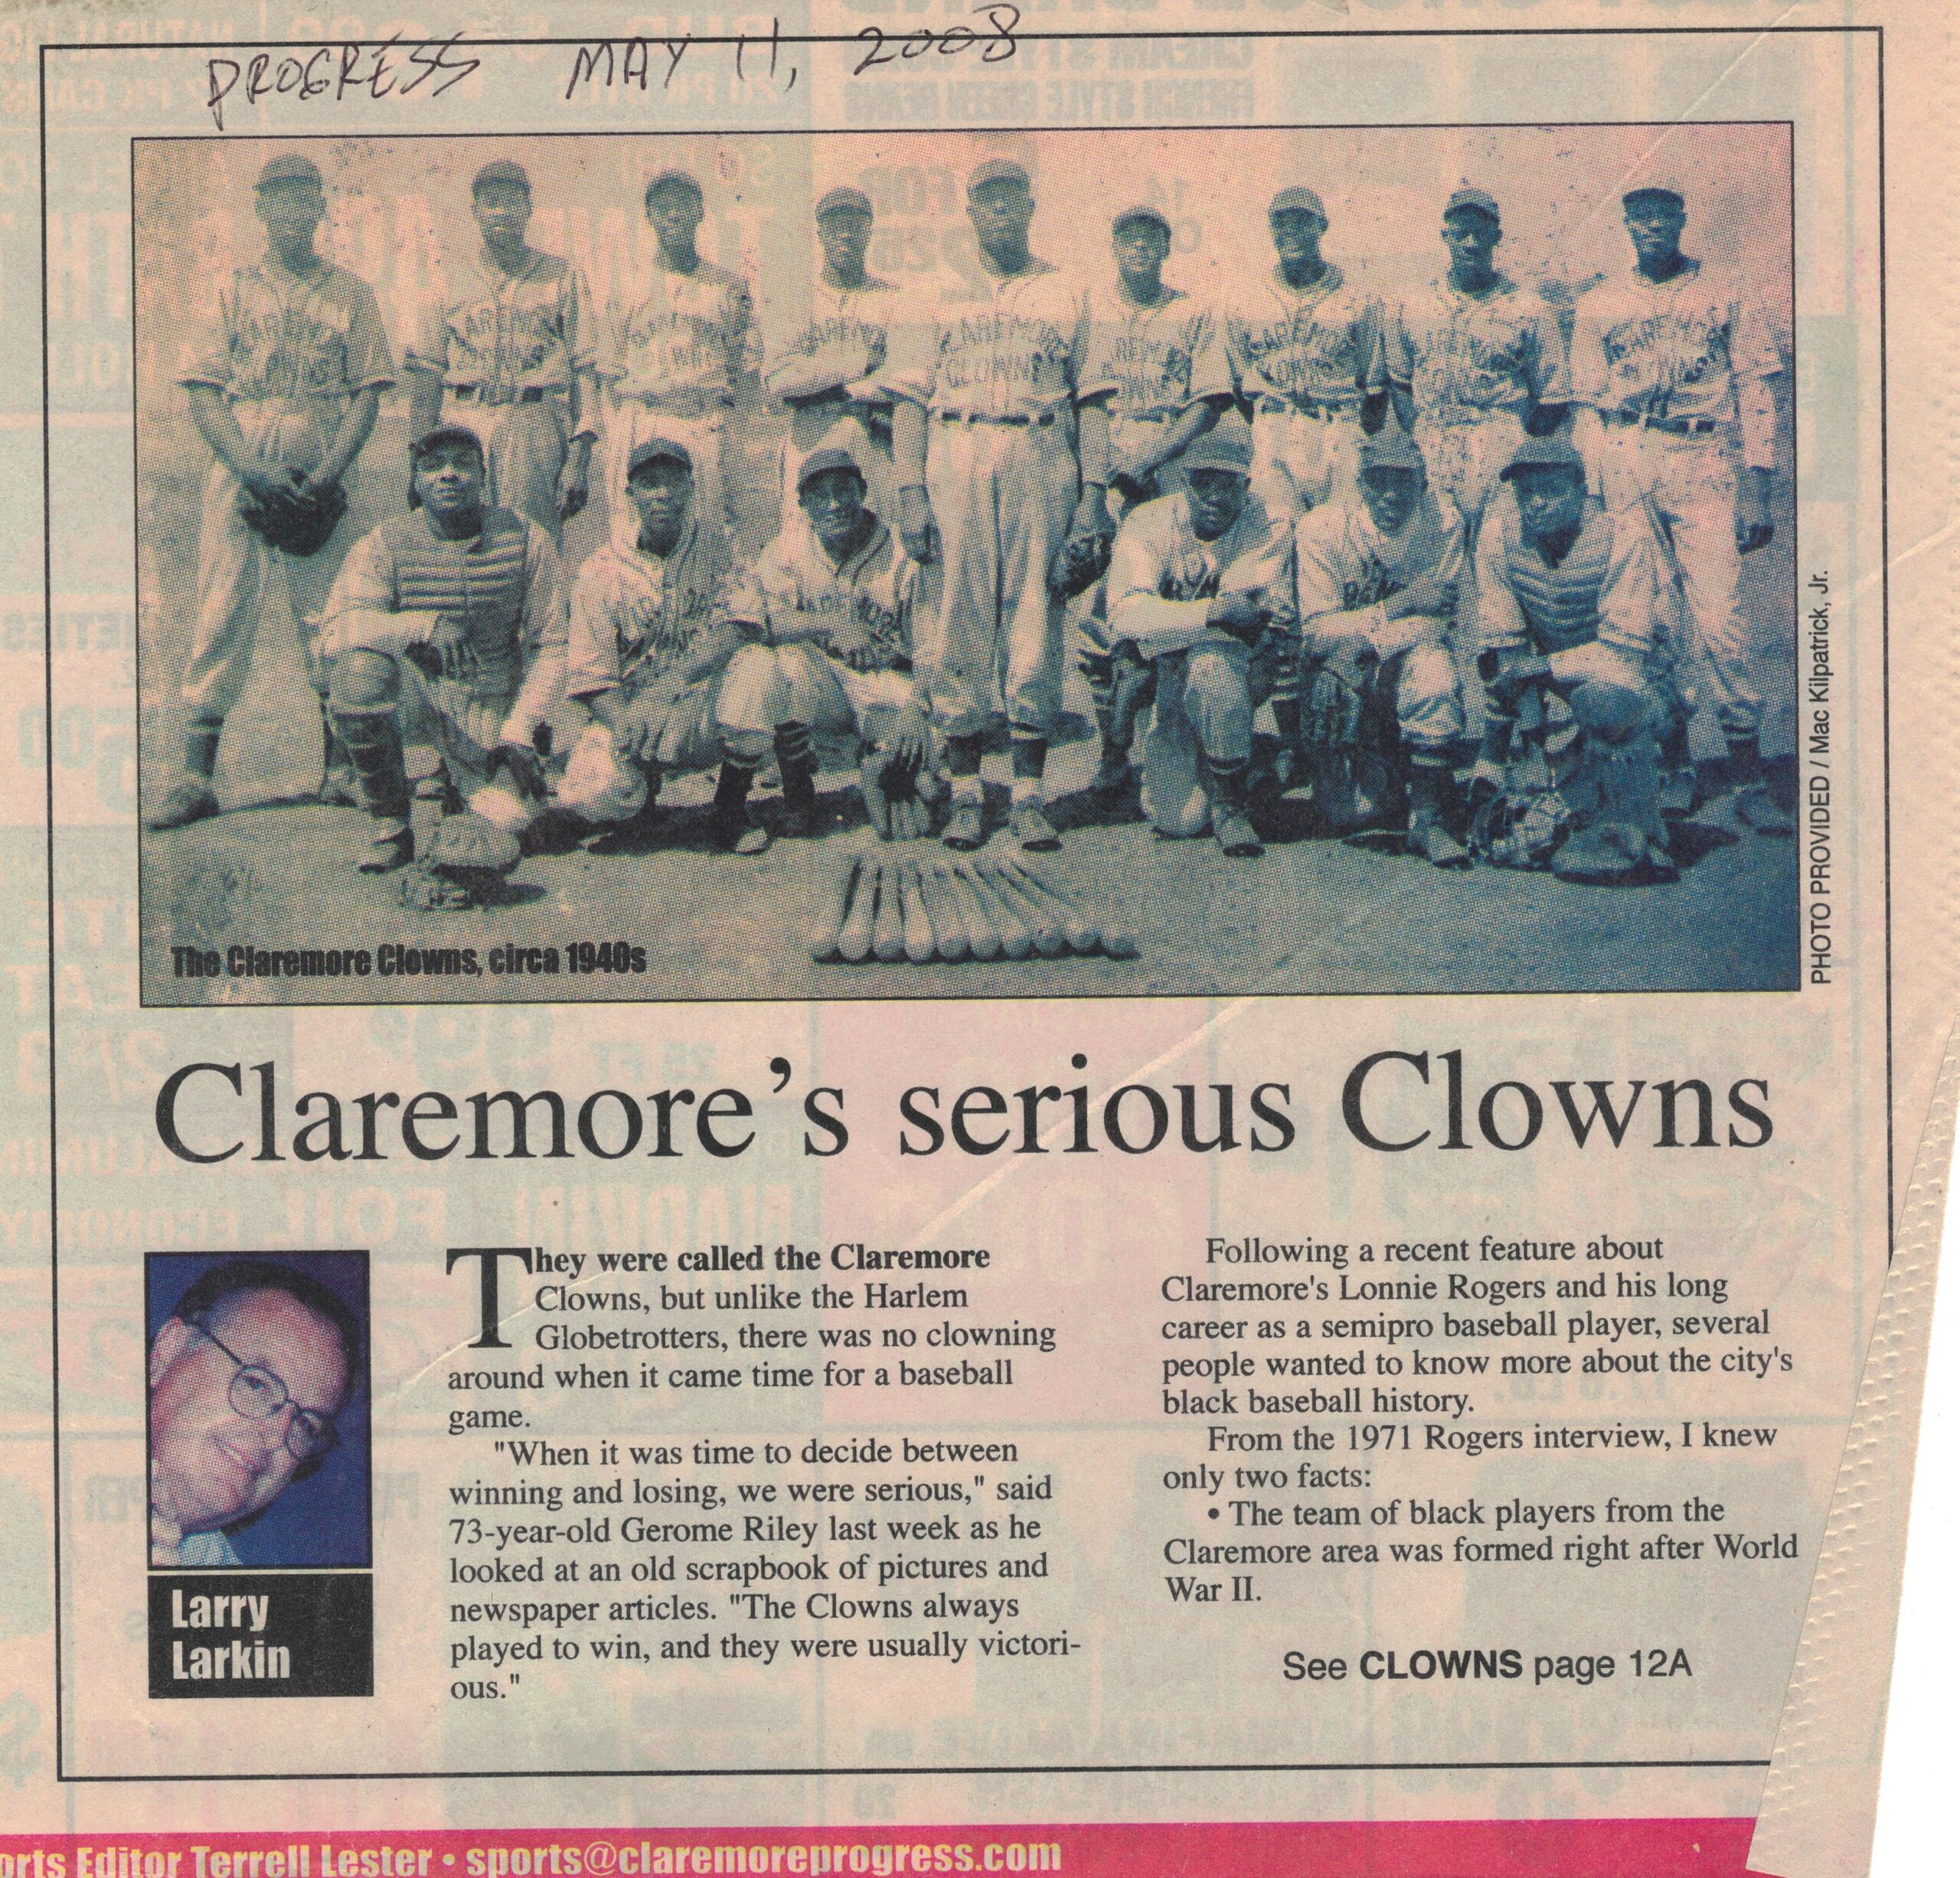 Photo of Black baseball team, the Claremore Clowns, and article text with handwritten newspaper title and date